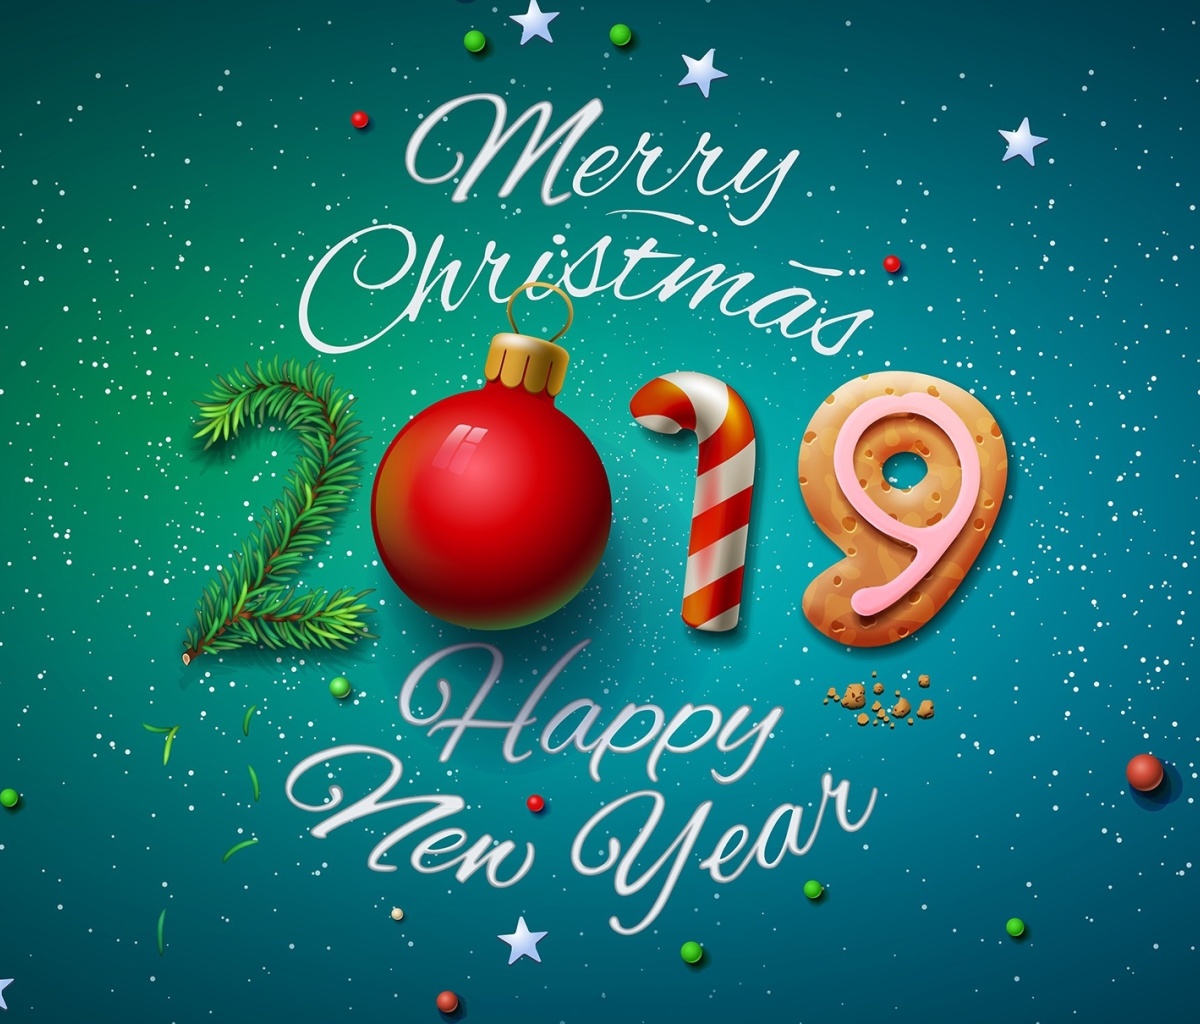 Merry Christmas and Happy New Year 2019 wallpaper 1200x1024